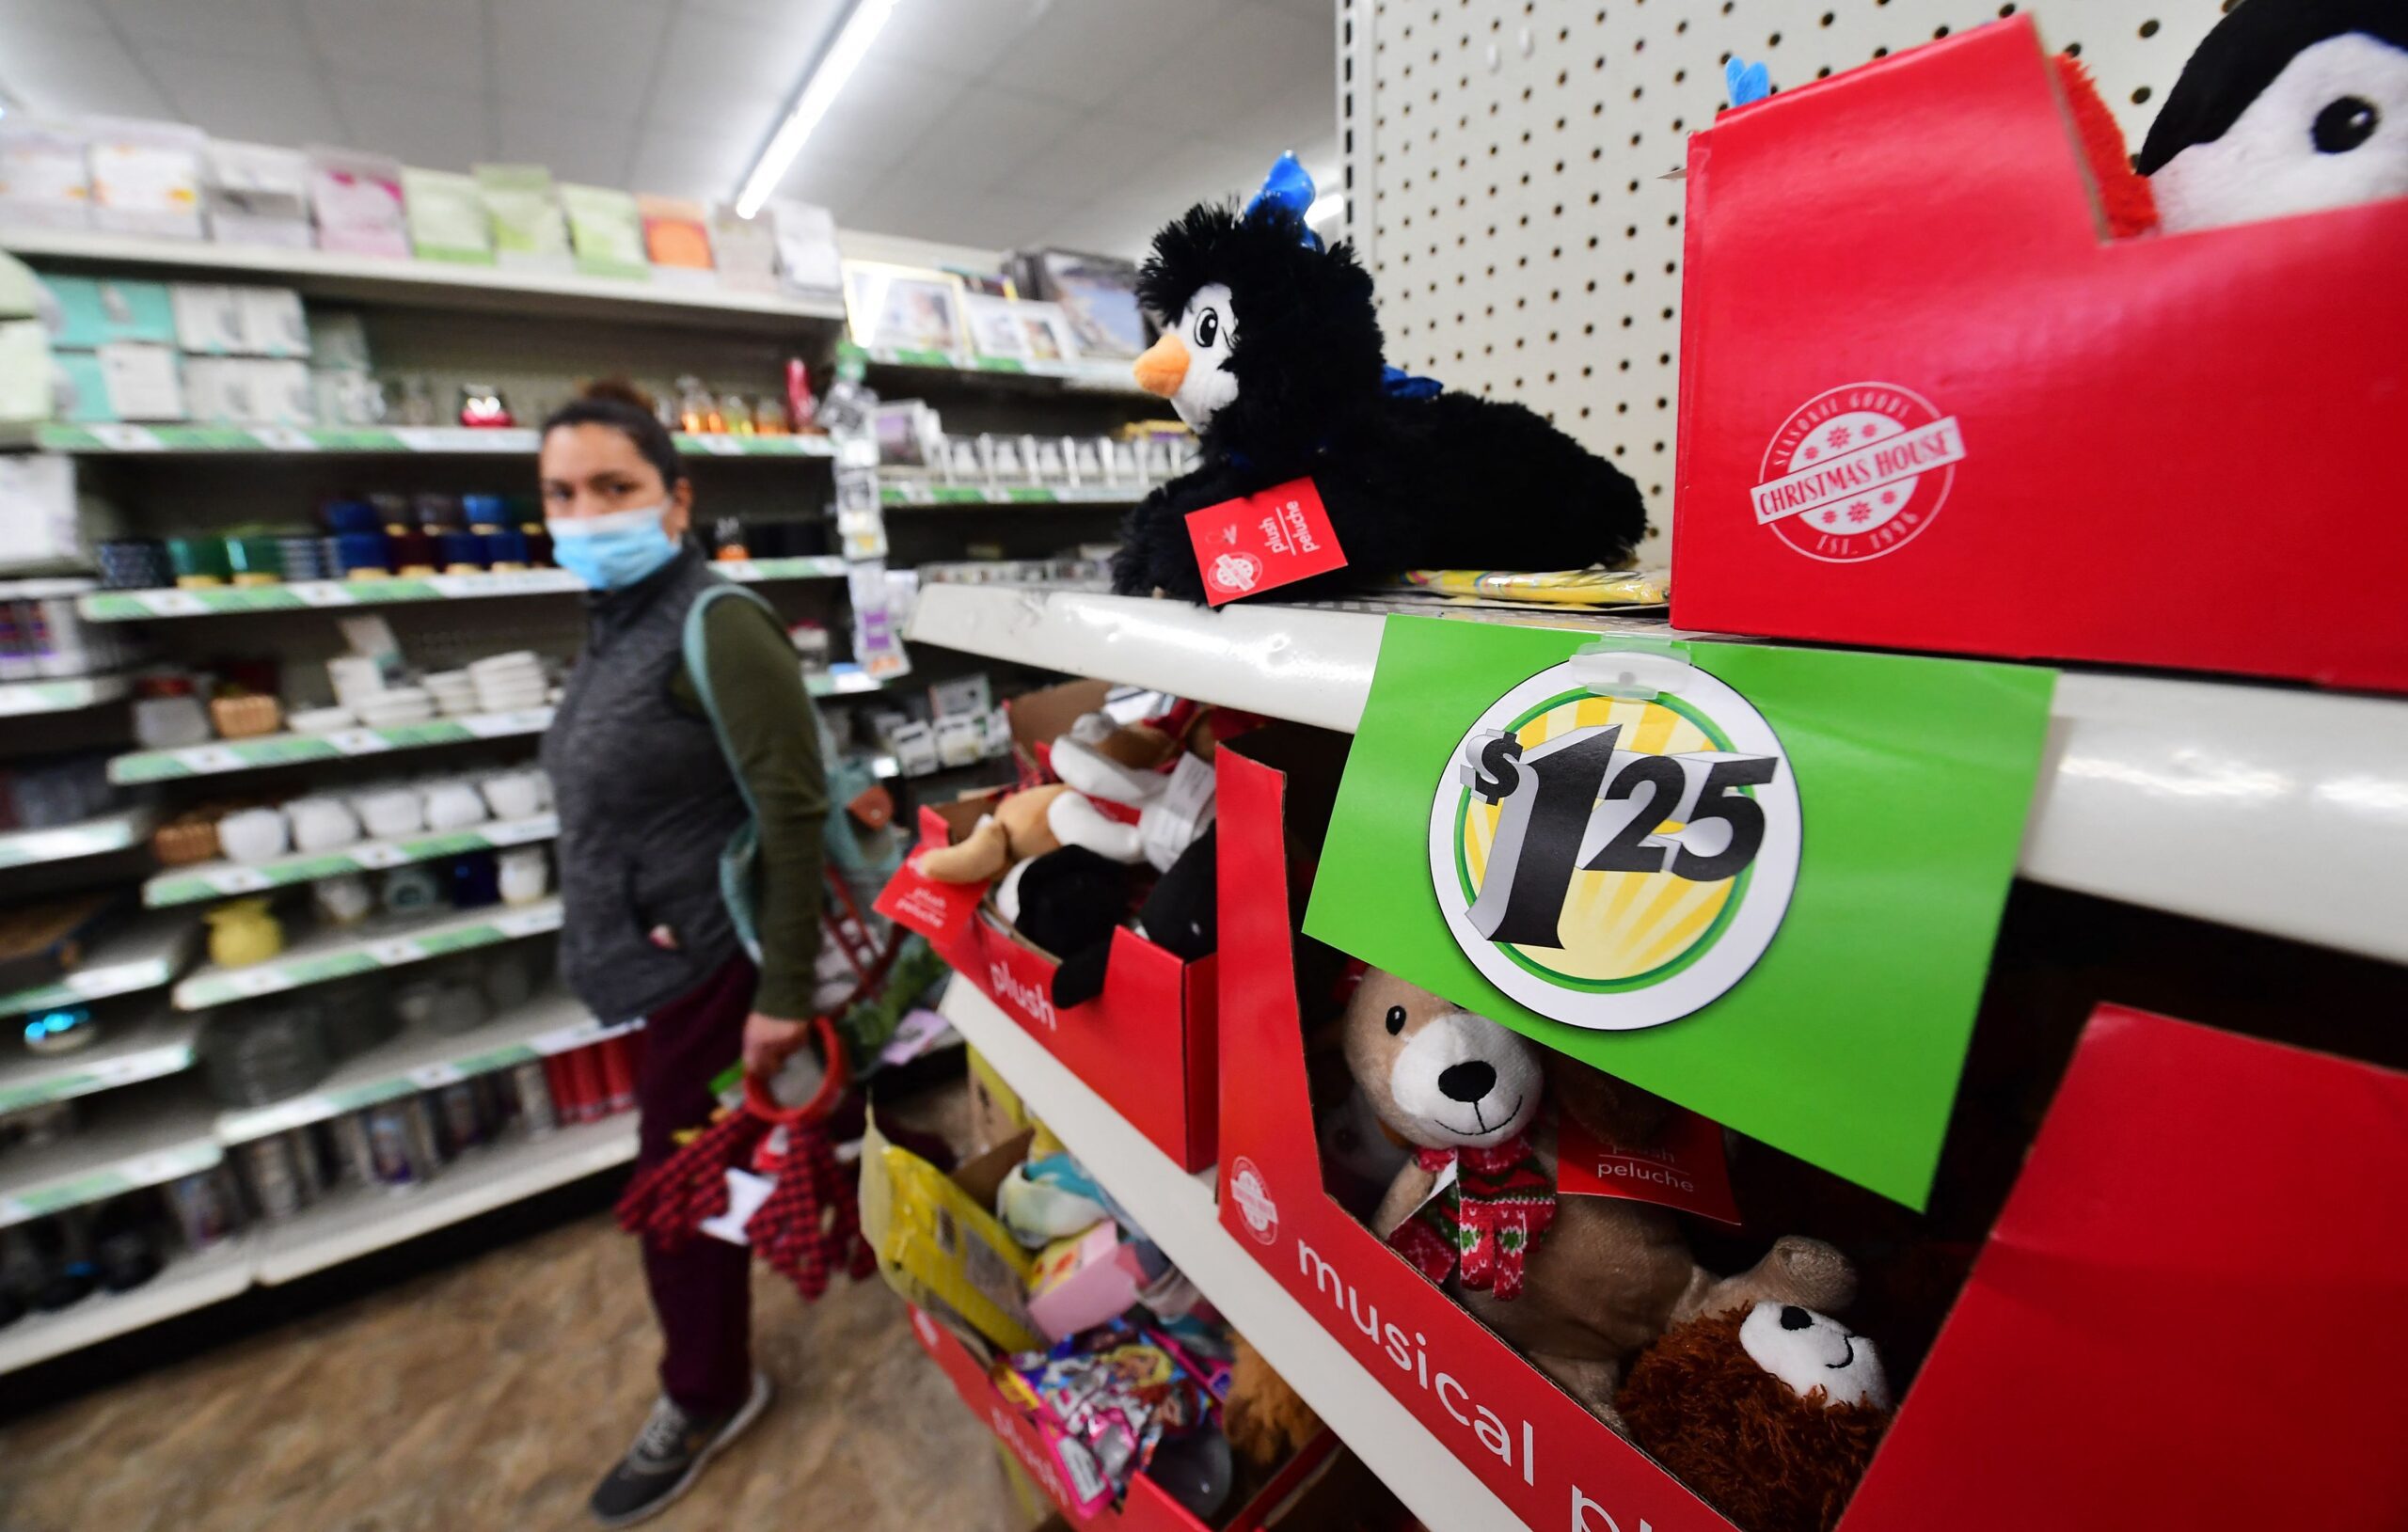 dollar-tree’s-controversial-new-$1.25-price-point-is-actually-working